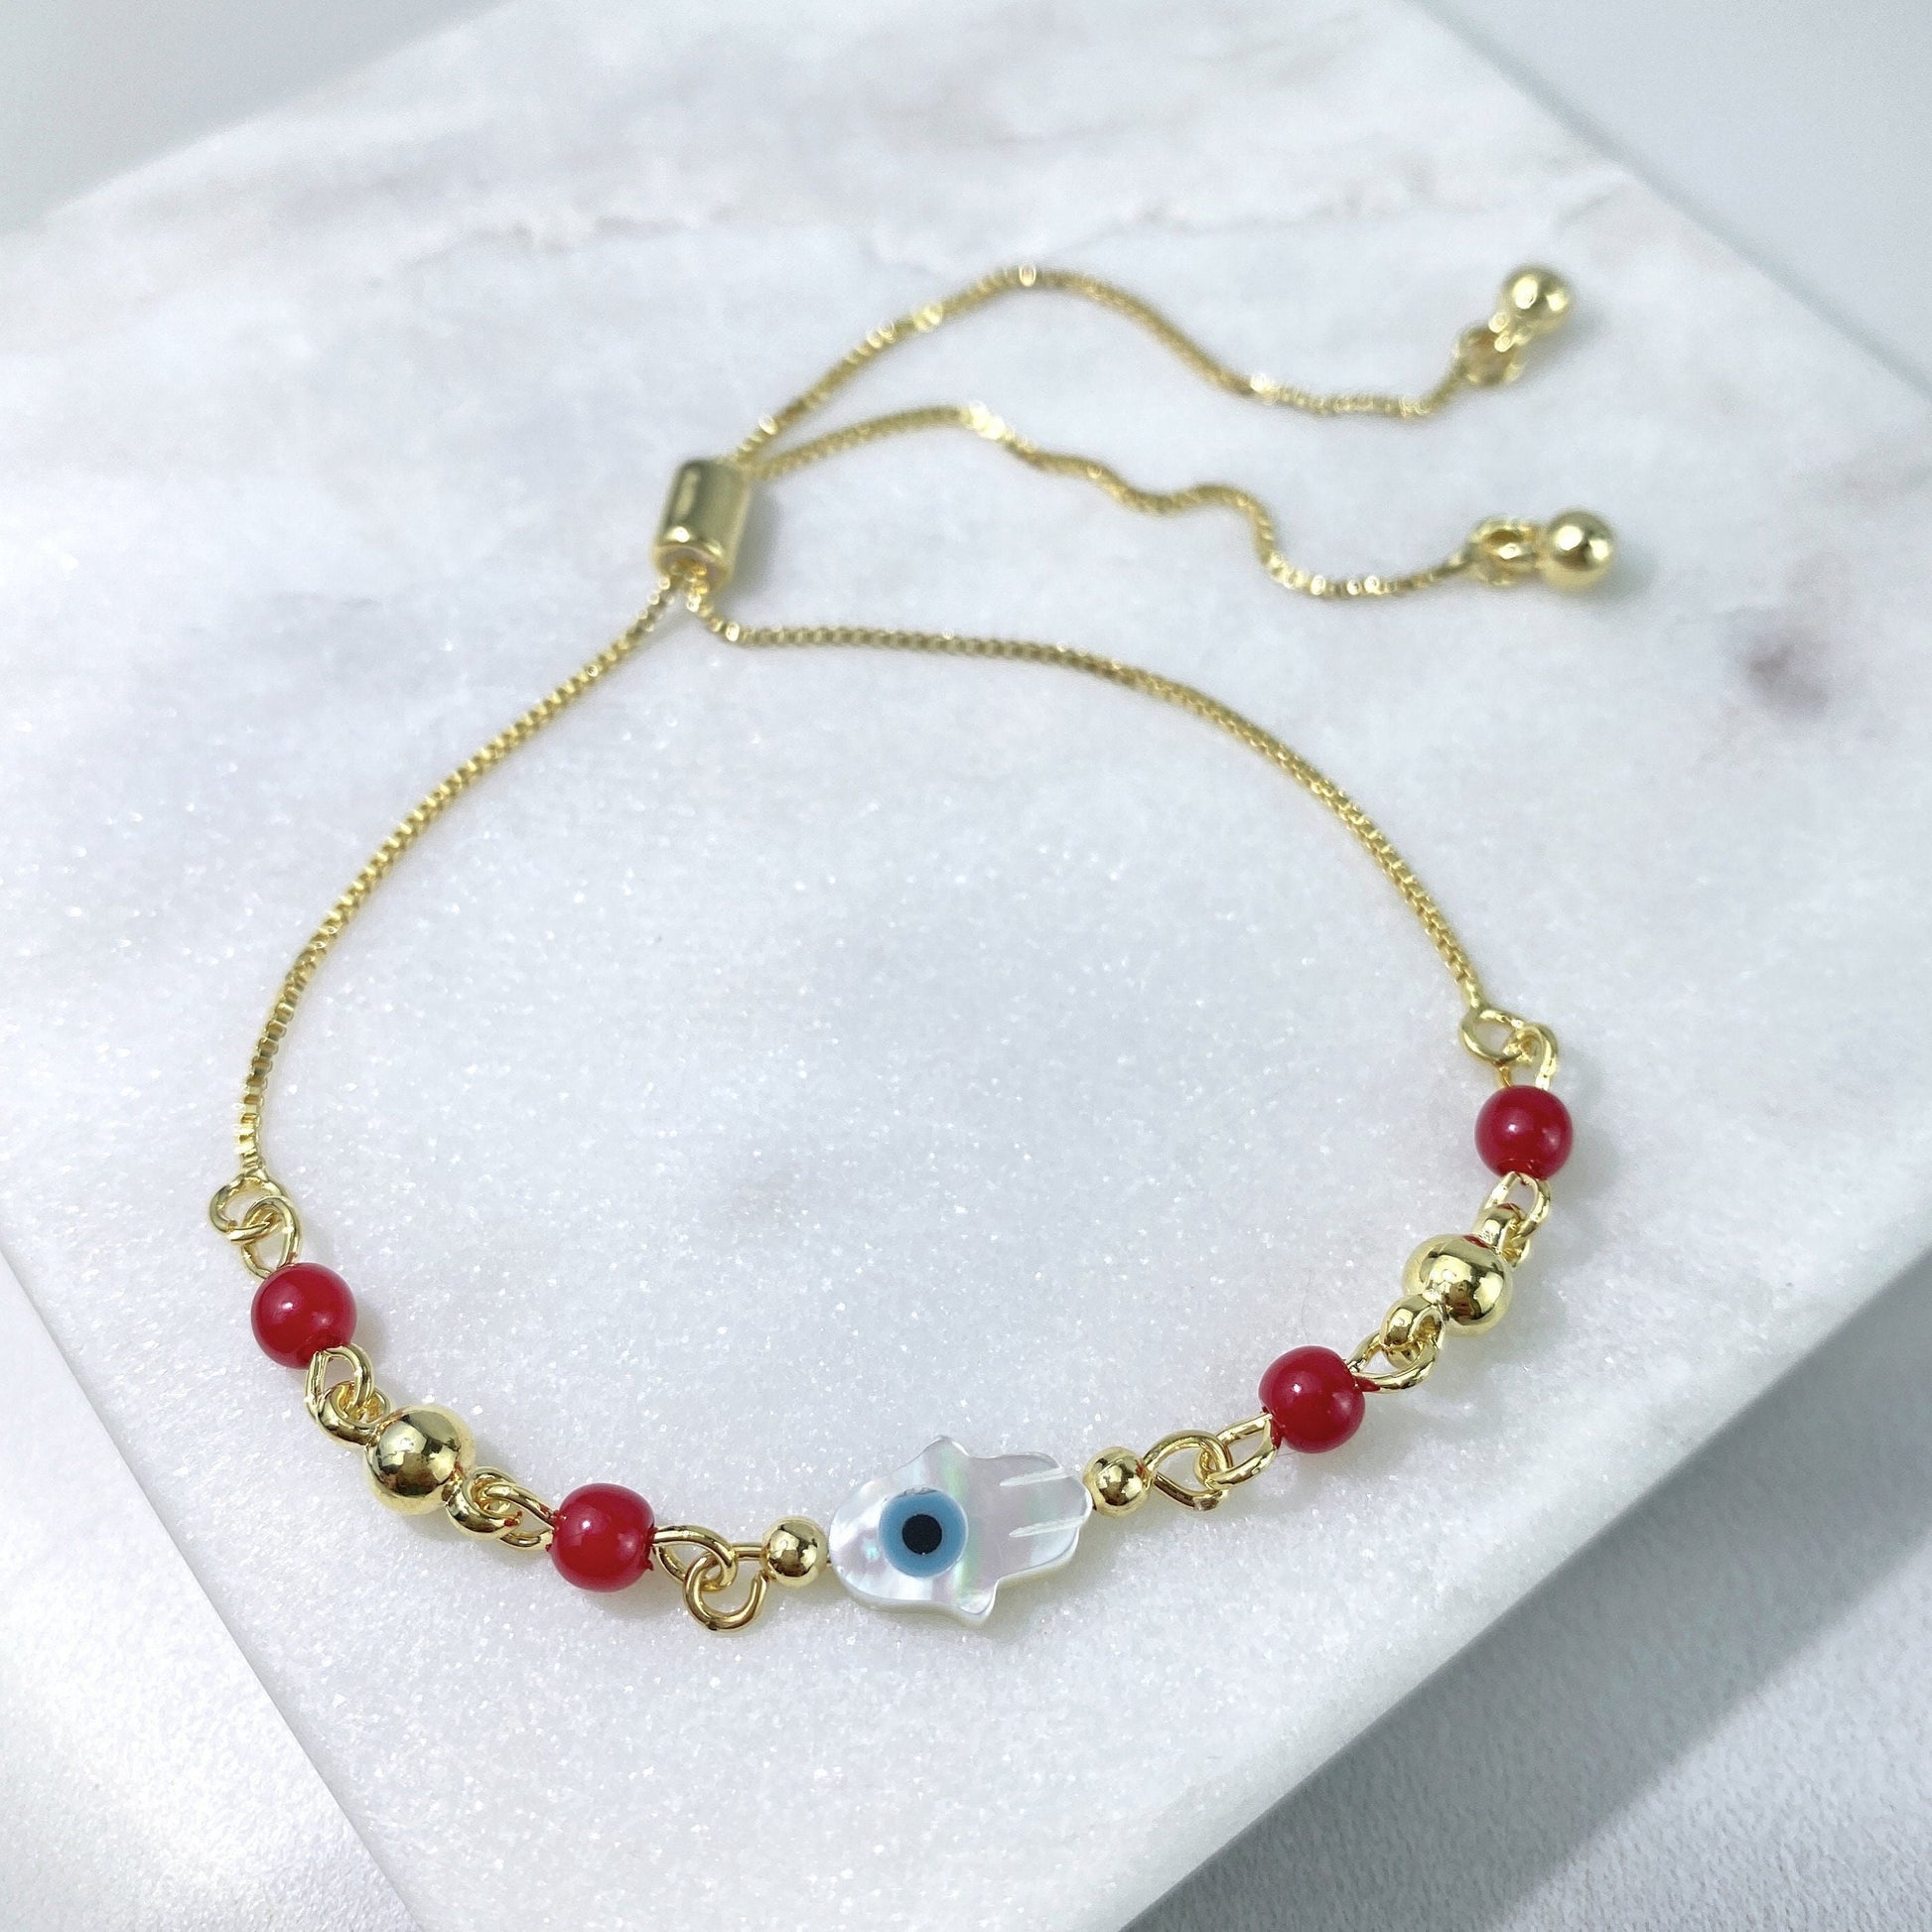 18k Gold Filled 1mm Box Chain, Red & Gold Beads, Blue Evil Eye Hamsa Hand, Adjustable Bracelet, Wholesale Jewelry Making Supplies